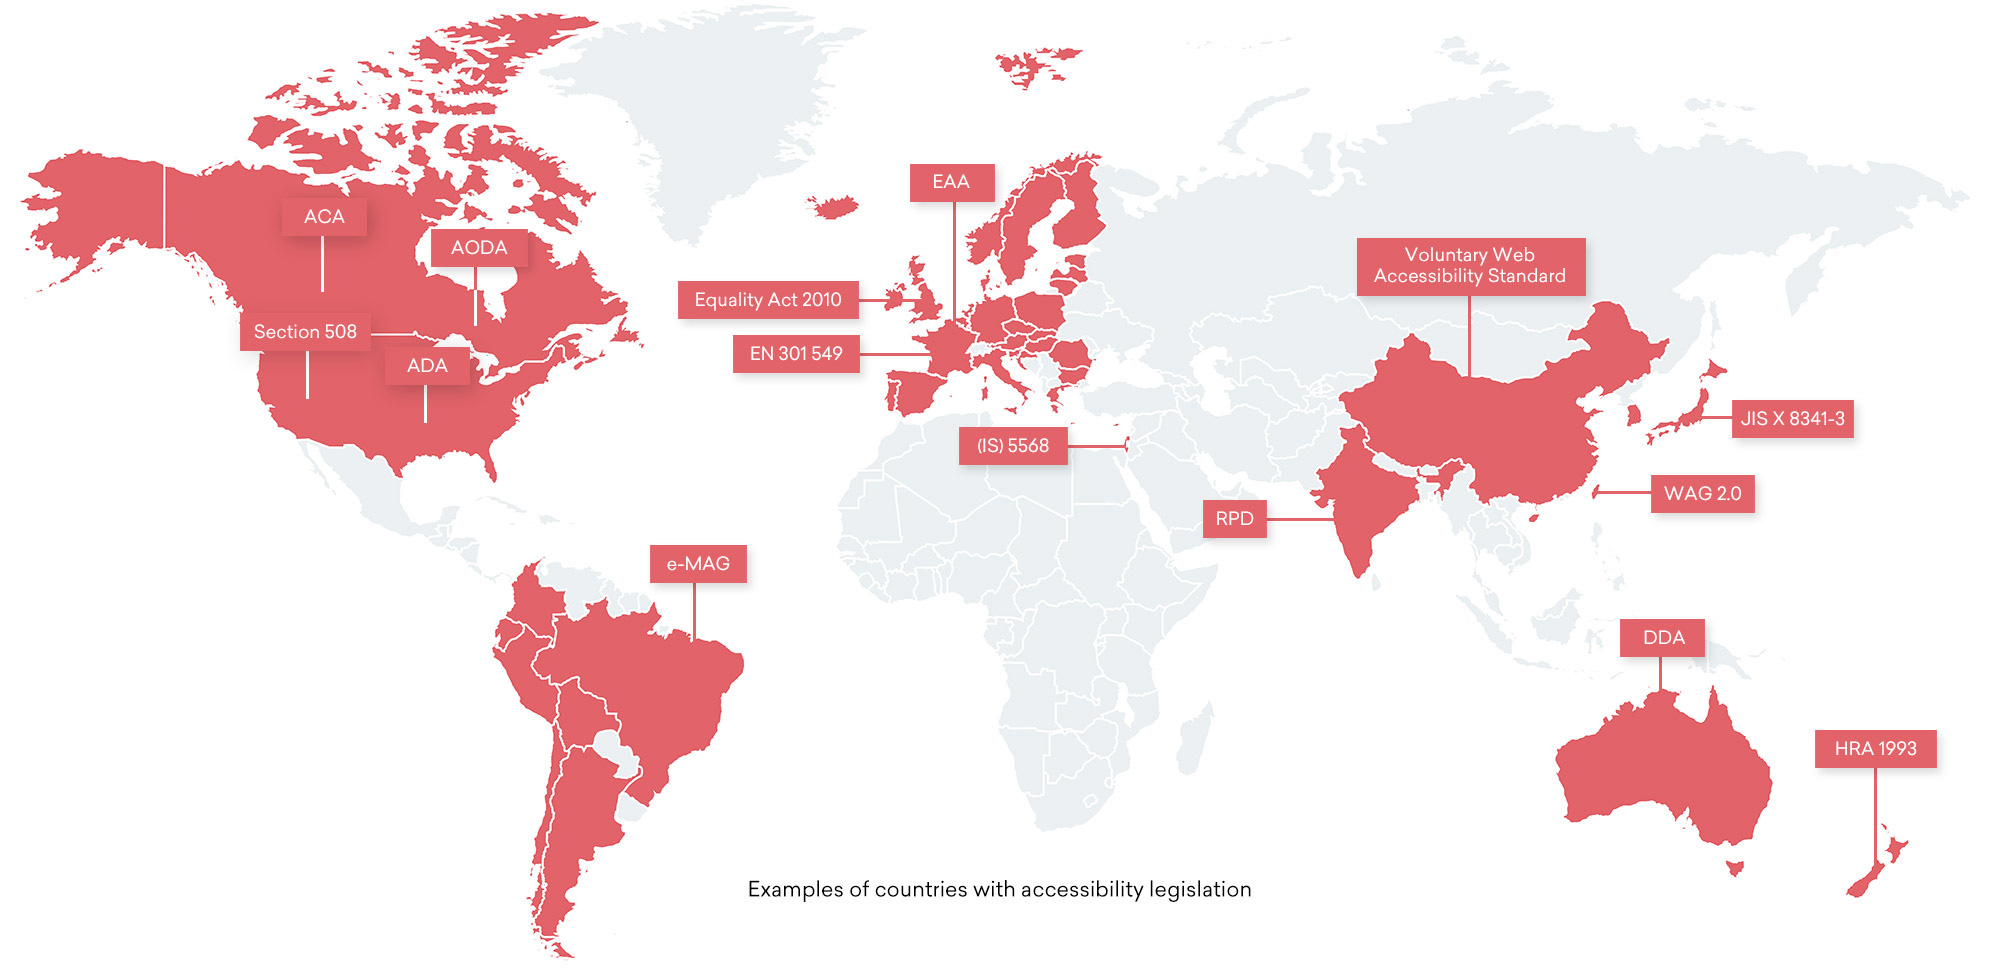 Web accessibility laws around the world